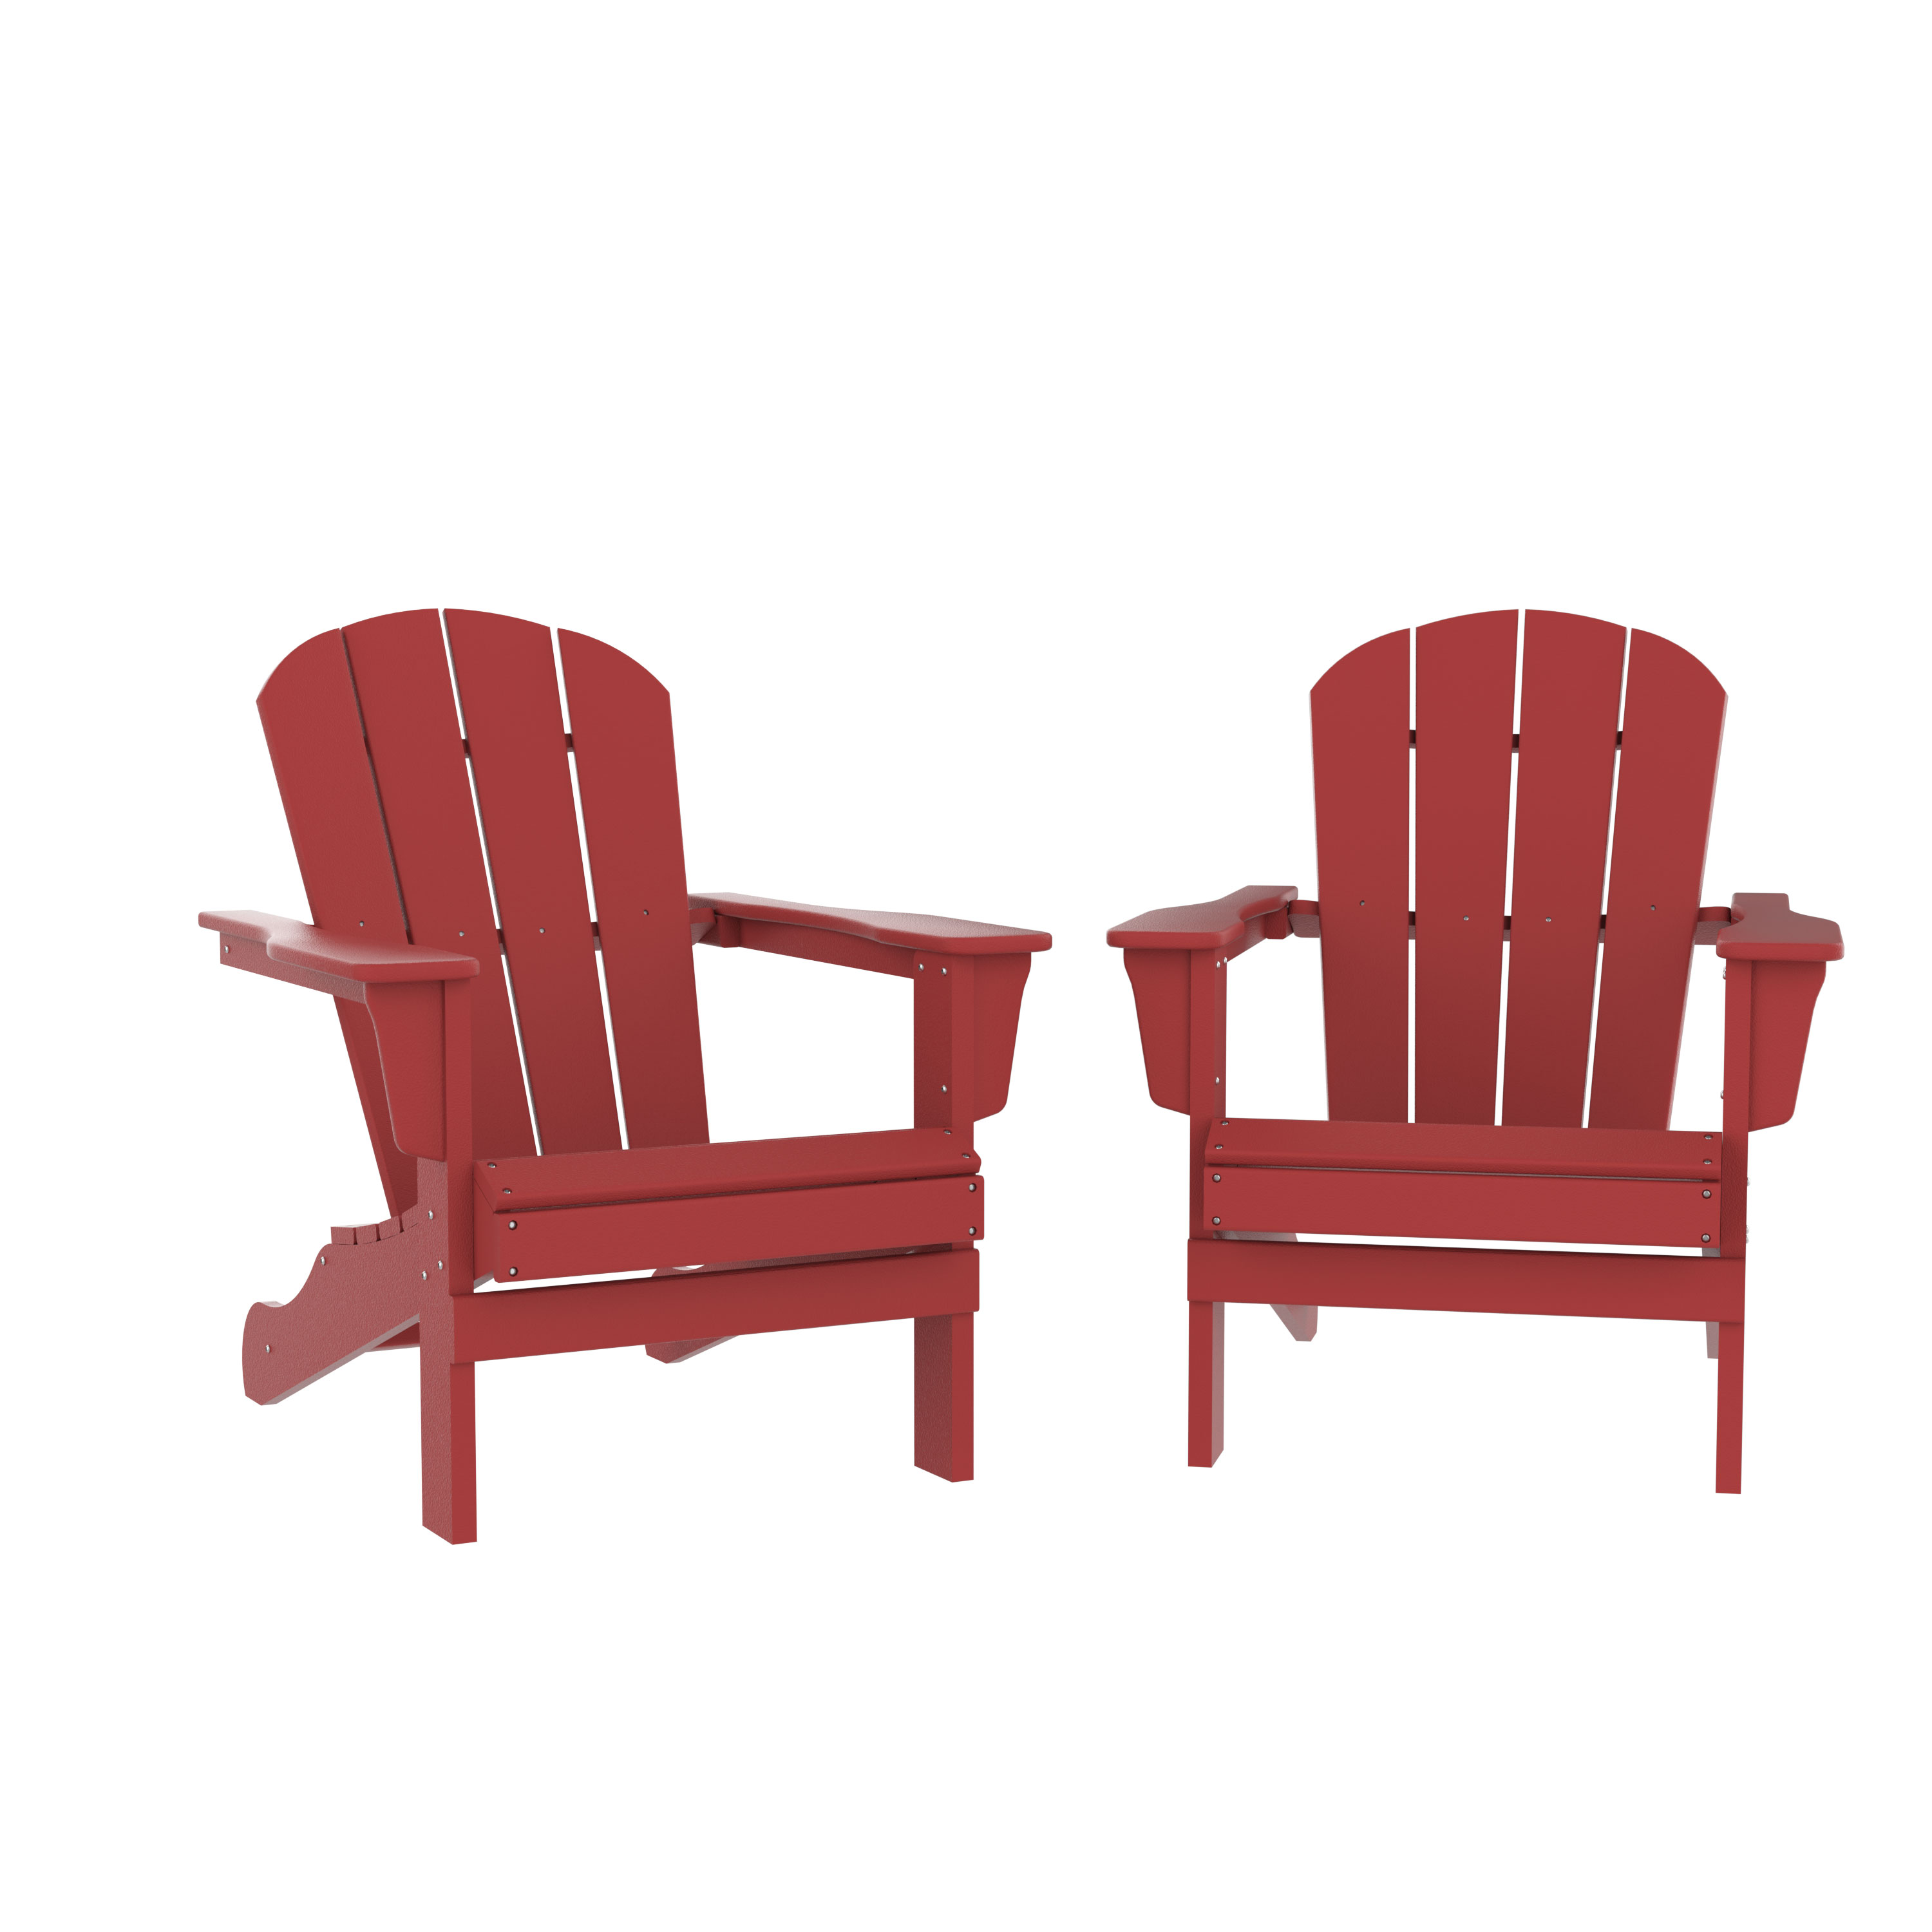 HDPE Adirondack Chair, Fire Pit Chairs, Sand Chair, Patio Outdoor Chairs,DPE Plastic Resin Deck Chair, lawn chairs, Adult Size ,Weather Resistant for Patio/ Backyard/Garden, Red, Set of 2 - image 3 of 4